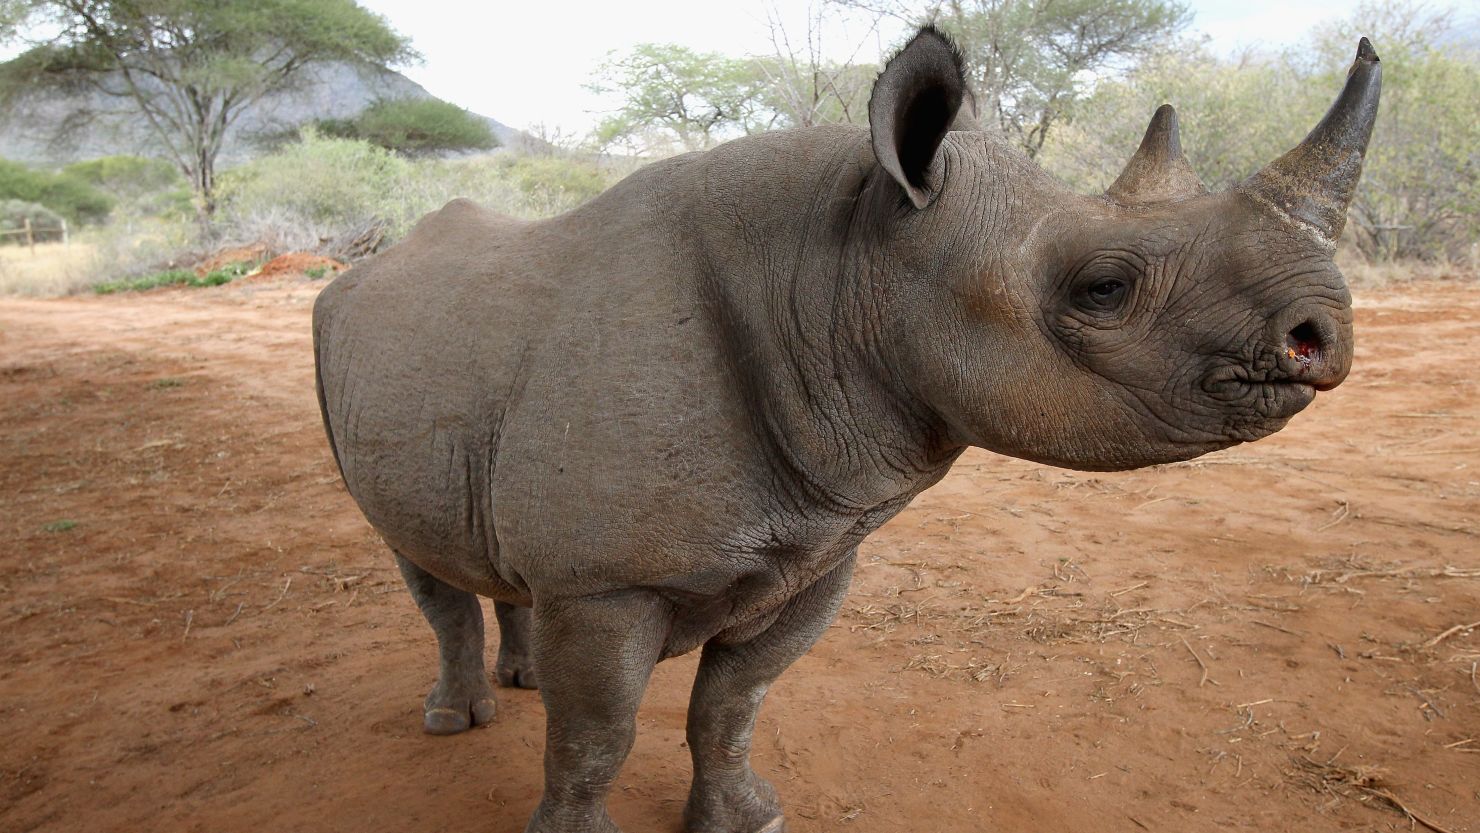 Kenya hopes that implanting microchips in every rhino nationwide will put an end to poaching.